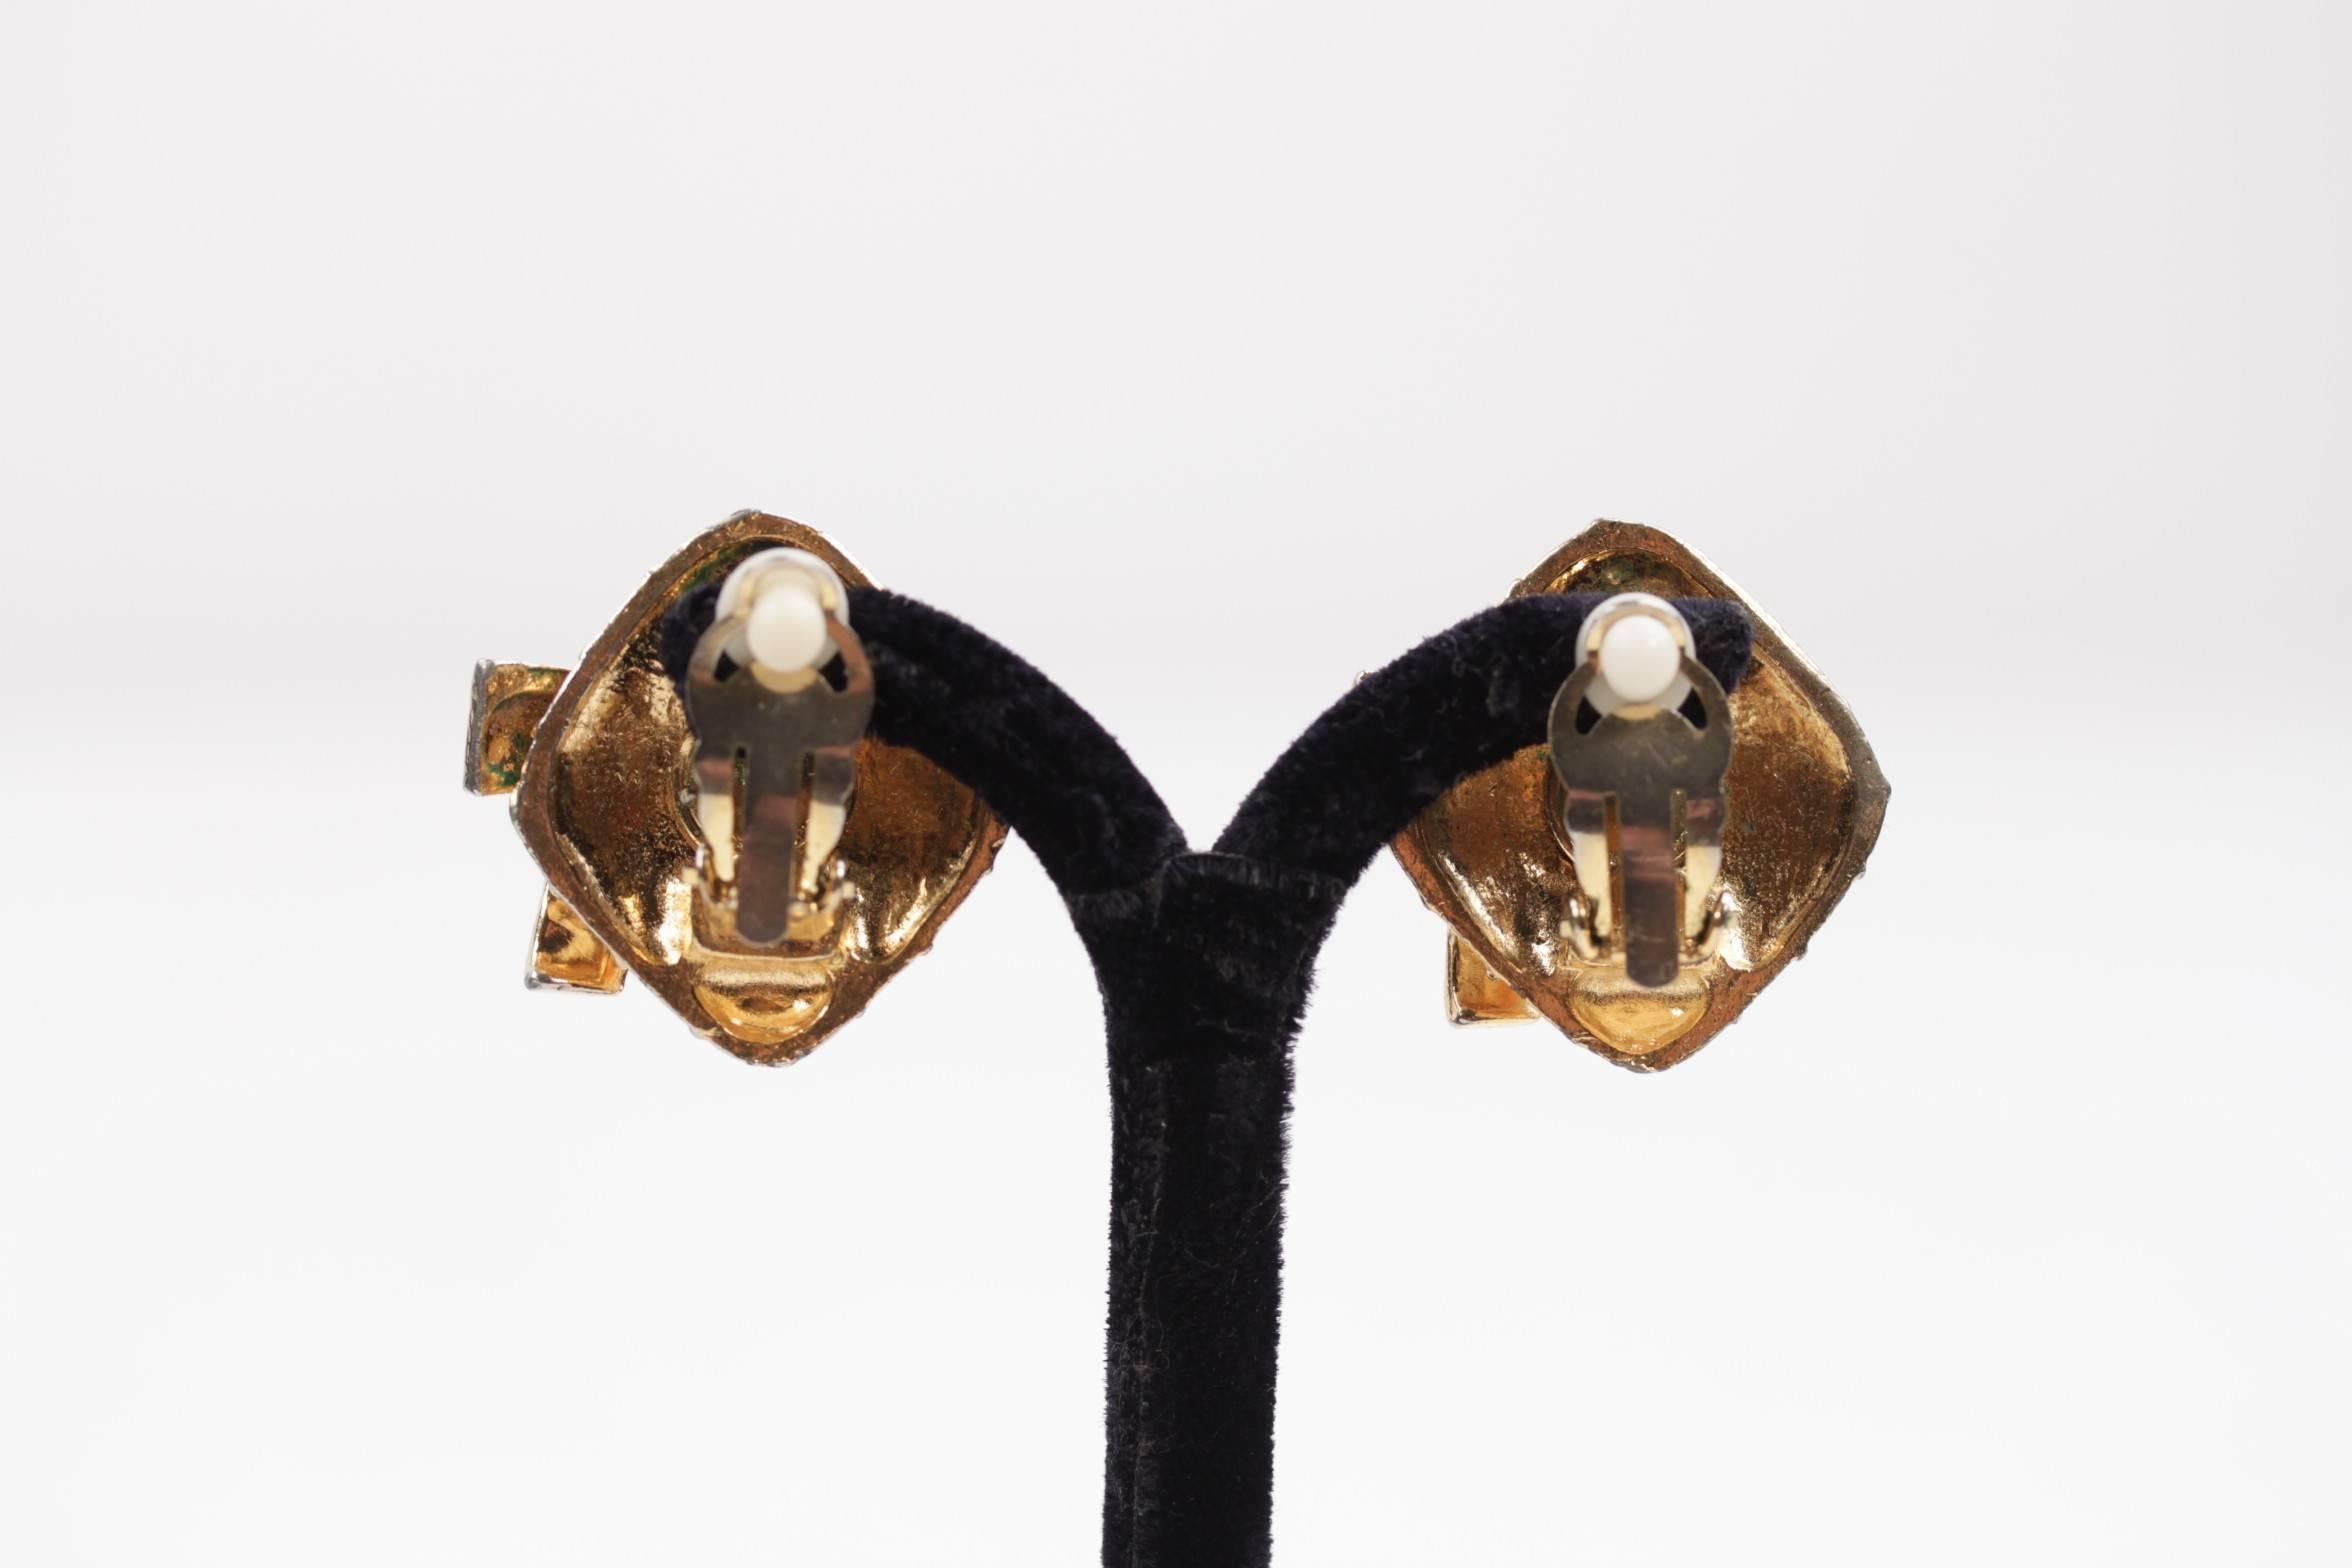 - Clip On Earrings in gold metal by CHANEL

- Period/ Era: 1980s

- Diamond shaped with quilting and bow details

- Clip-on closures

- Signed ' CHANEL CC - made in France' on the reverse of the earrings

- Approx. measurements max width: